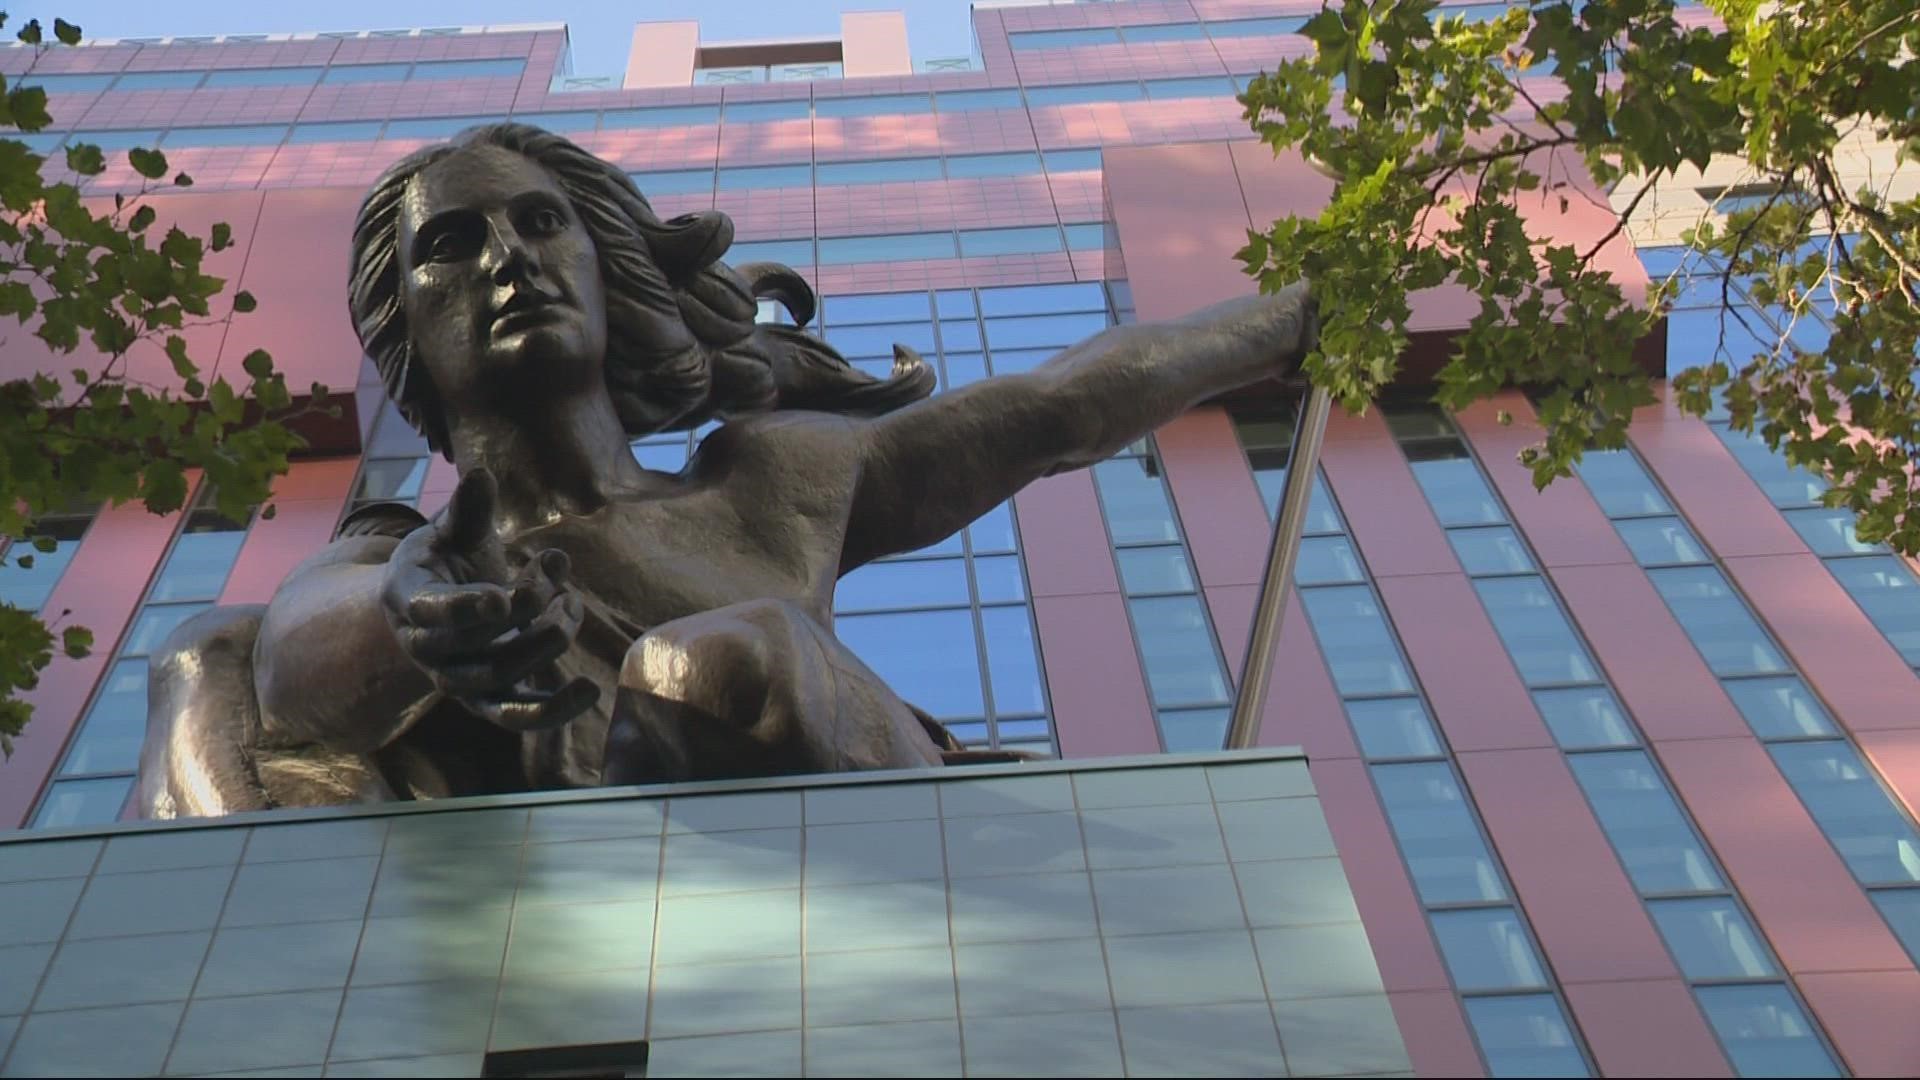 The 'Portlandia statue' that sits on top of the 'Portland Building' was installed 37 years ago. Devon Haskins spoke to the artist behind the iconic statue.